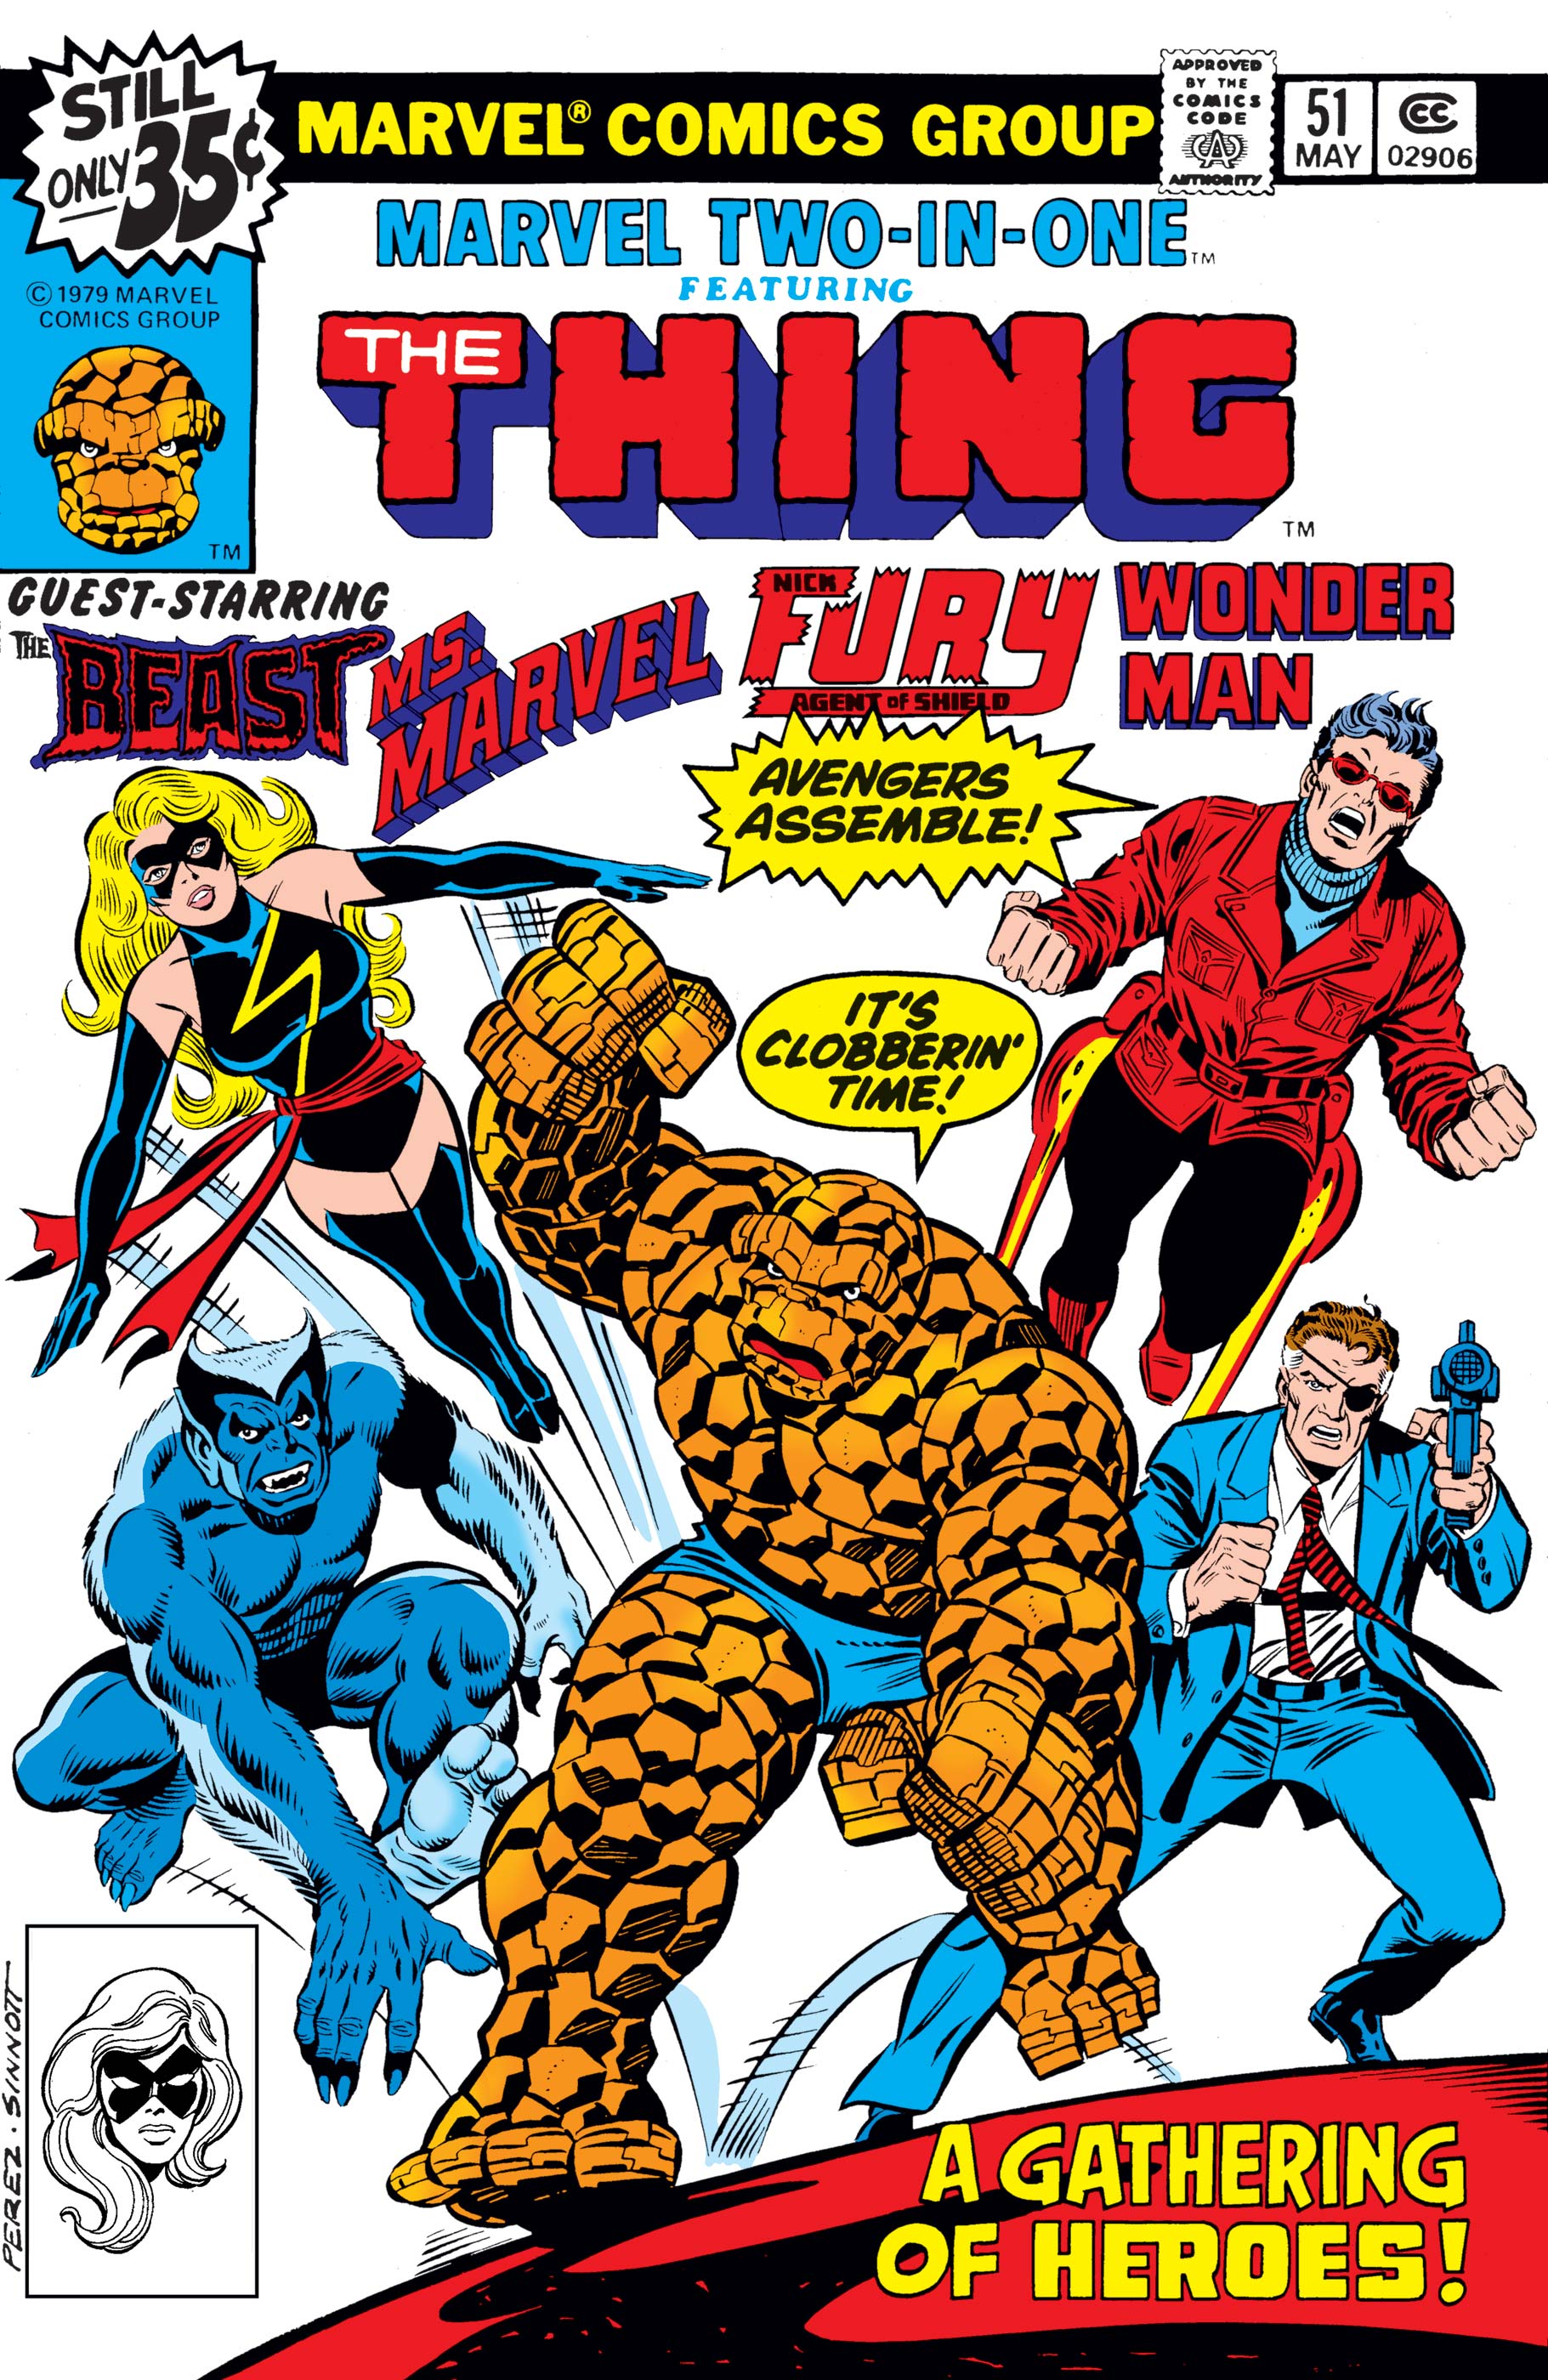 Marvel Two-in-One (1974) #51